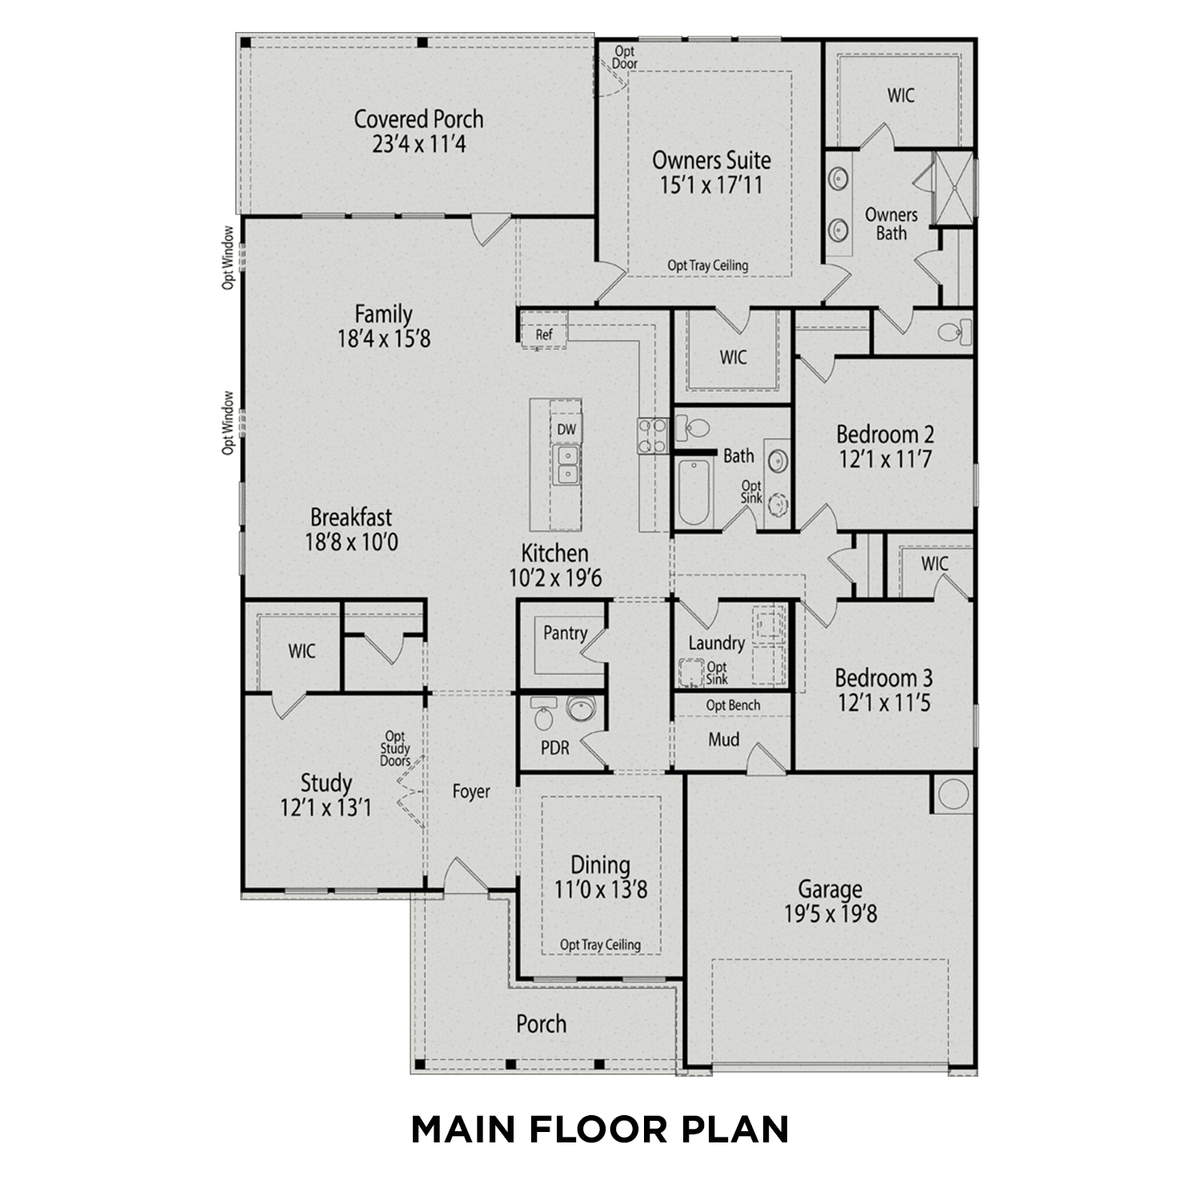 1 - The Magnolia A floor plan layout for 238 Harvester Road in Davidson Homes' Tobacco Road community.